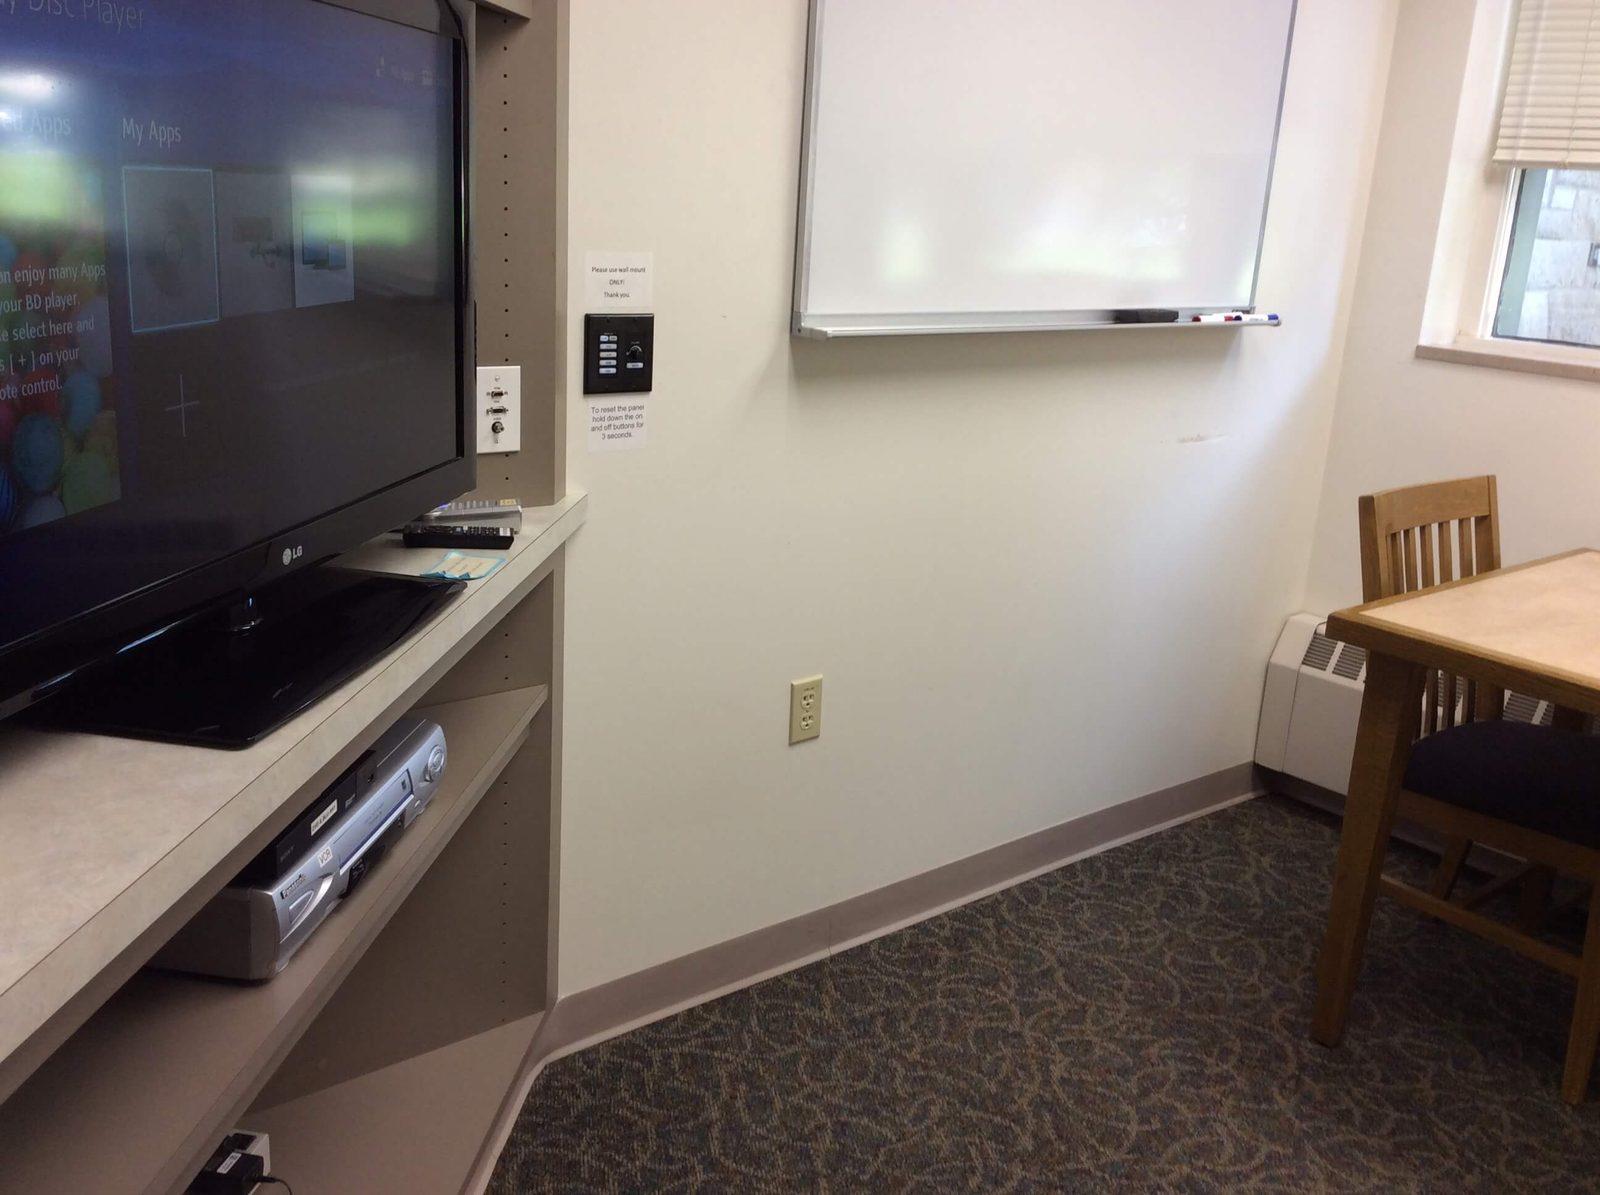 A library viewing room, which includes a dry erase board, table, two chairs, a large monitor, DVD/Blu-Ray player, and VCR